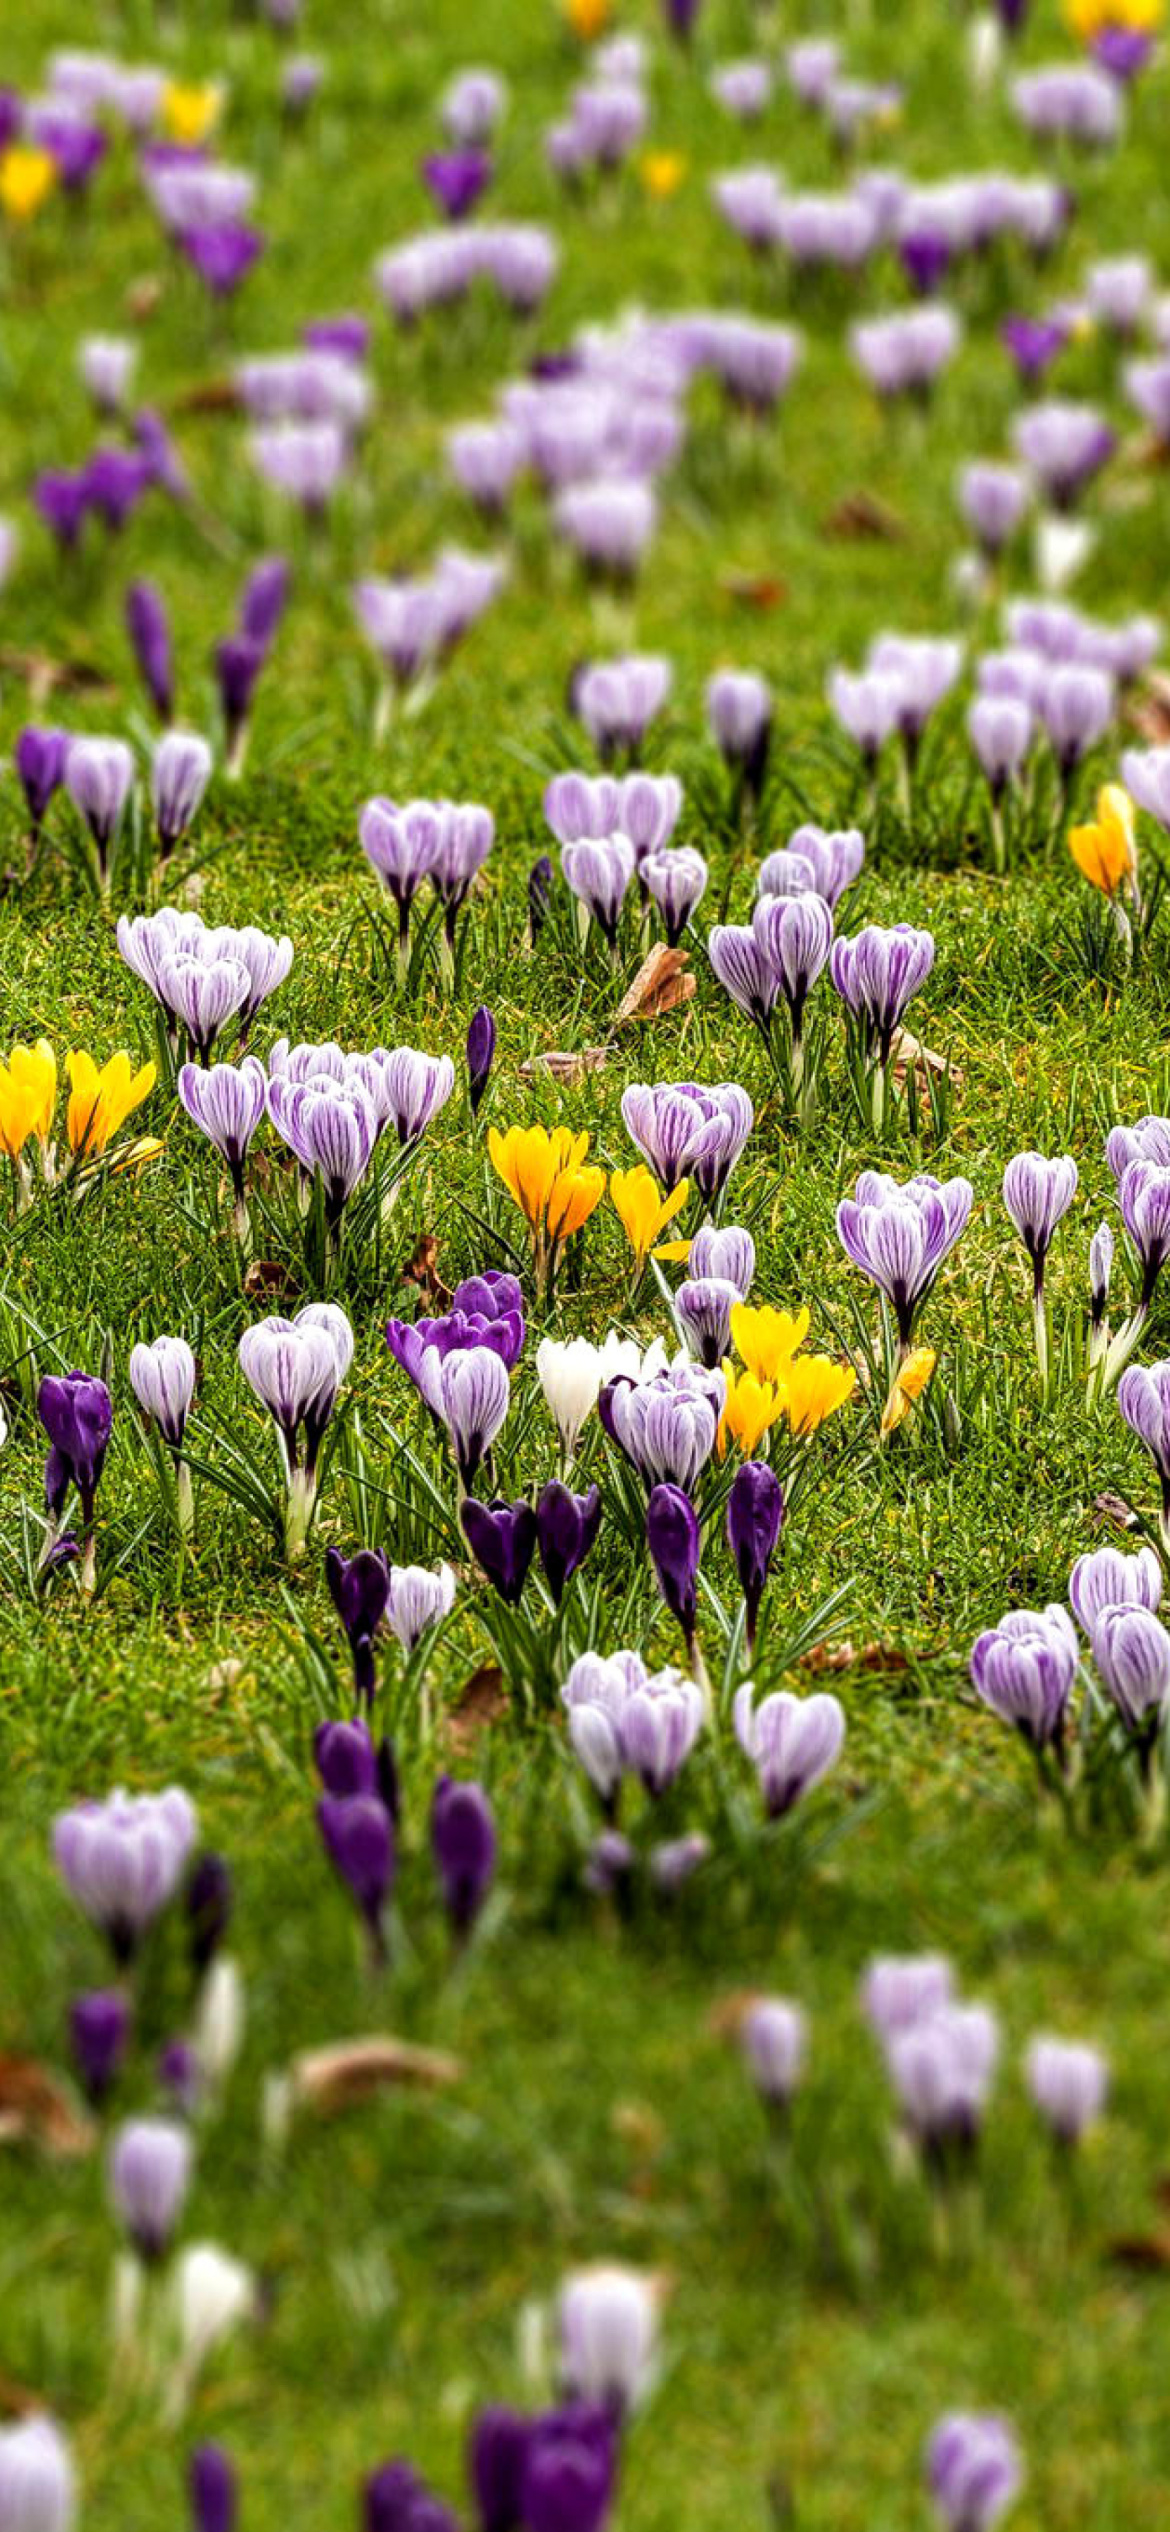 Crocuses and Spring Meadow wallpaper 1170x2532